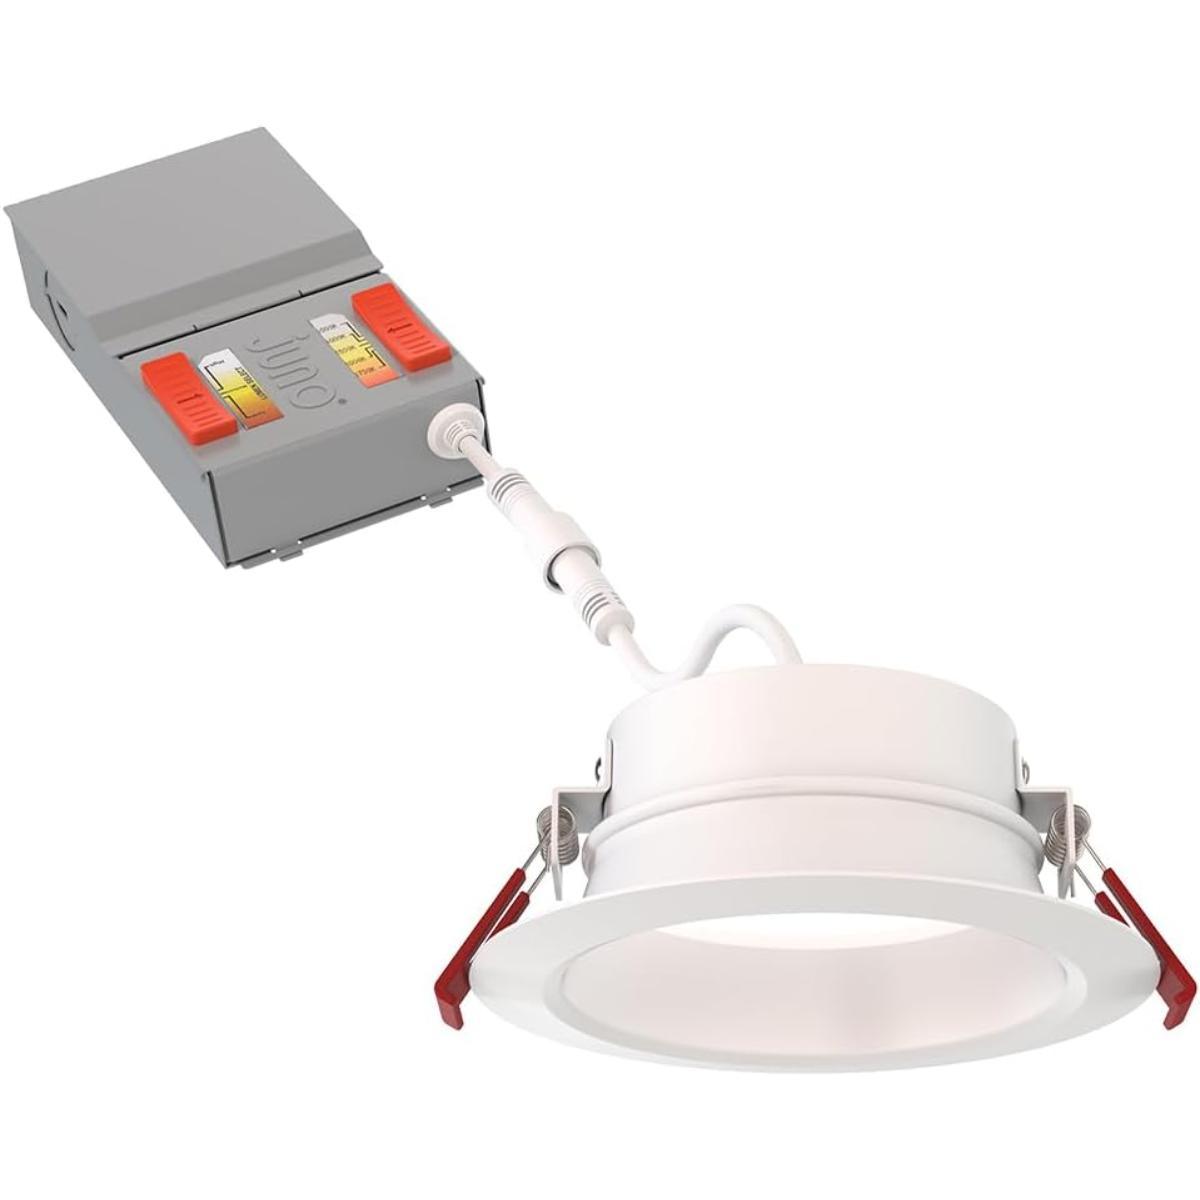 4 inch Wafer Canless LED Recessed Light, 14.5 Watt, 1100 Lumens, Selectable CCT, 2700K to 5000K, Smooth Trim